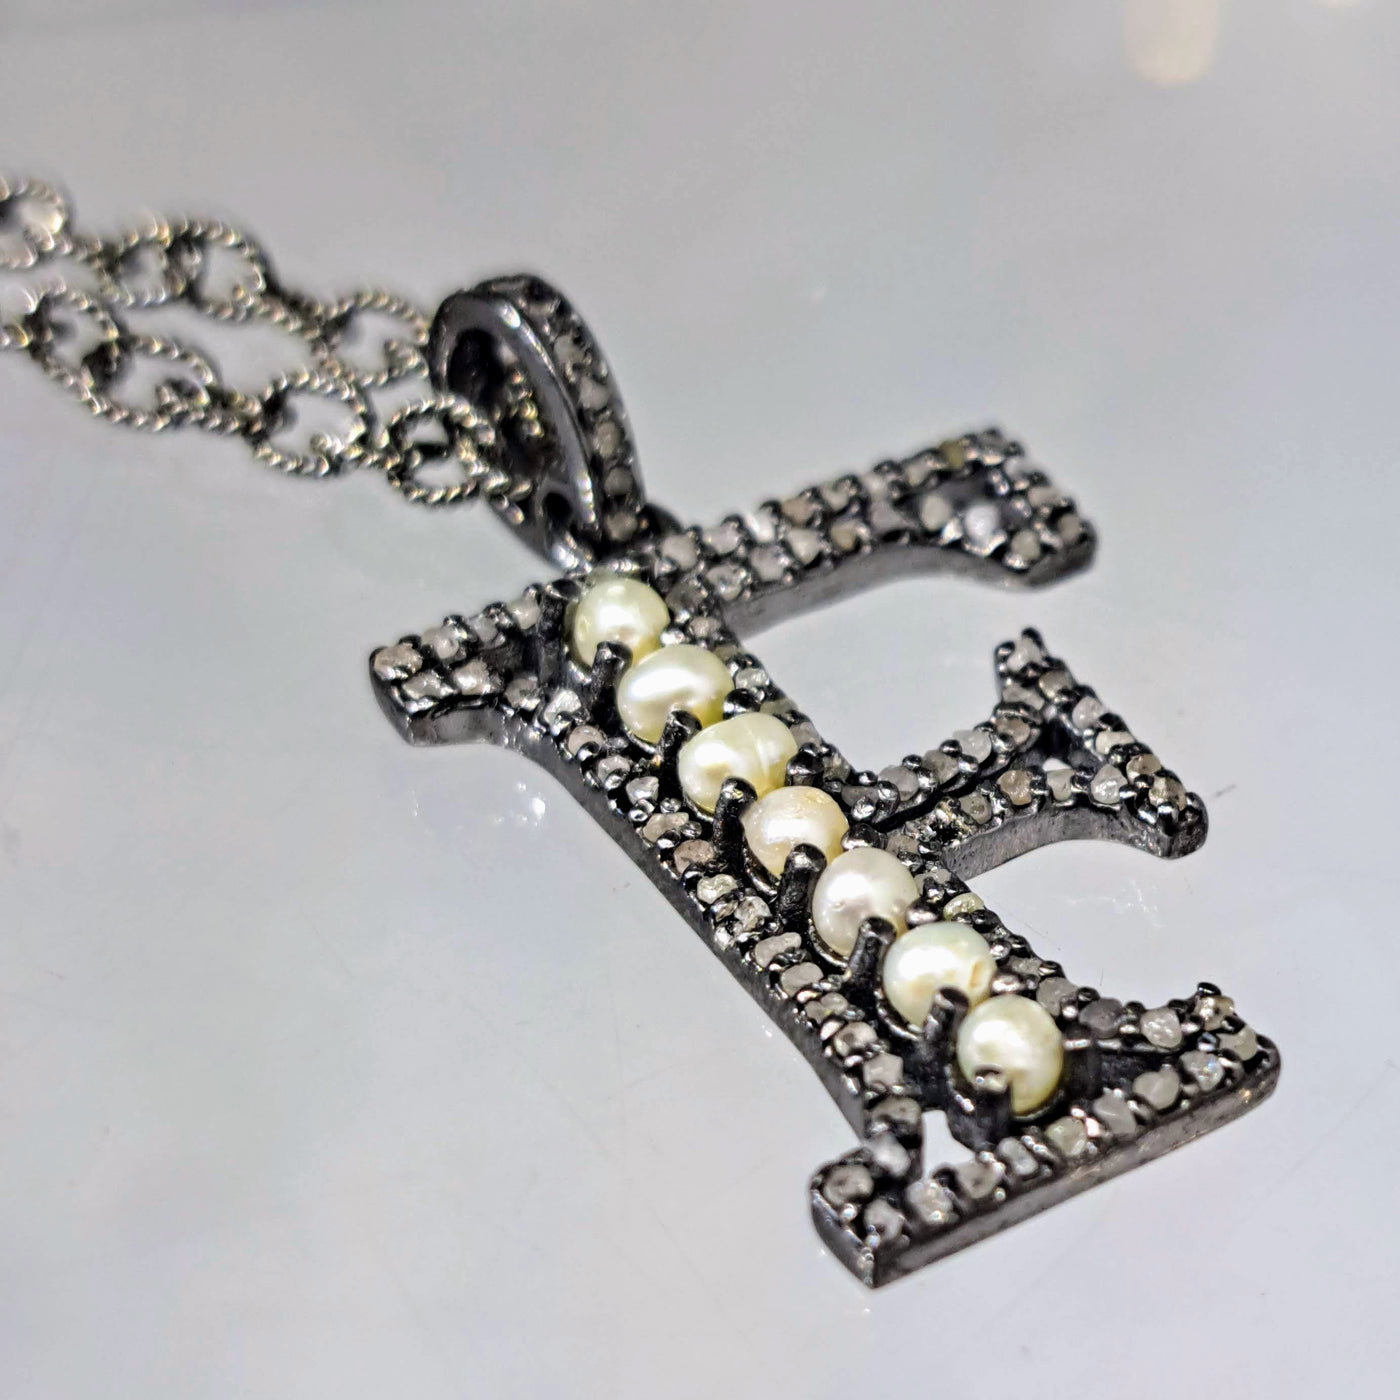 "F-Bomb" 24" Necklace - Diamonds, Pearls, Sterling